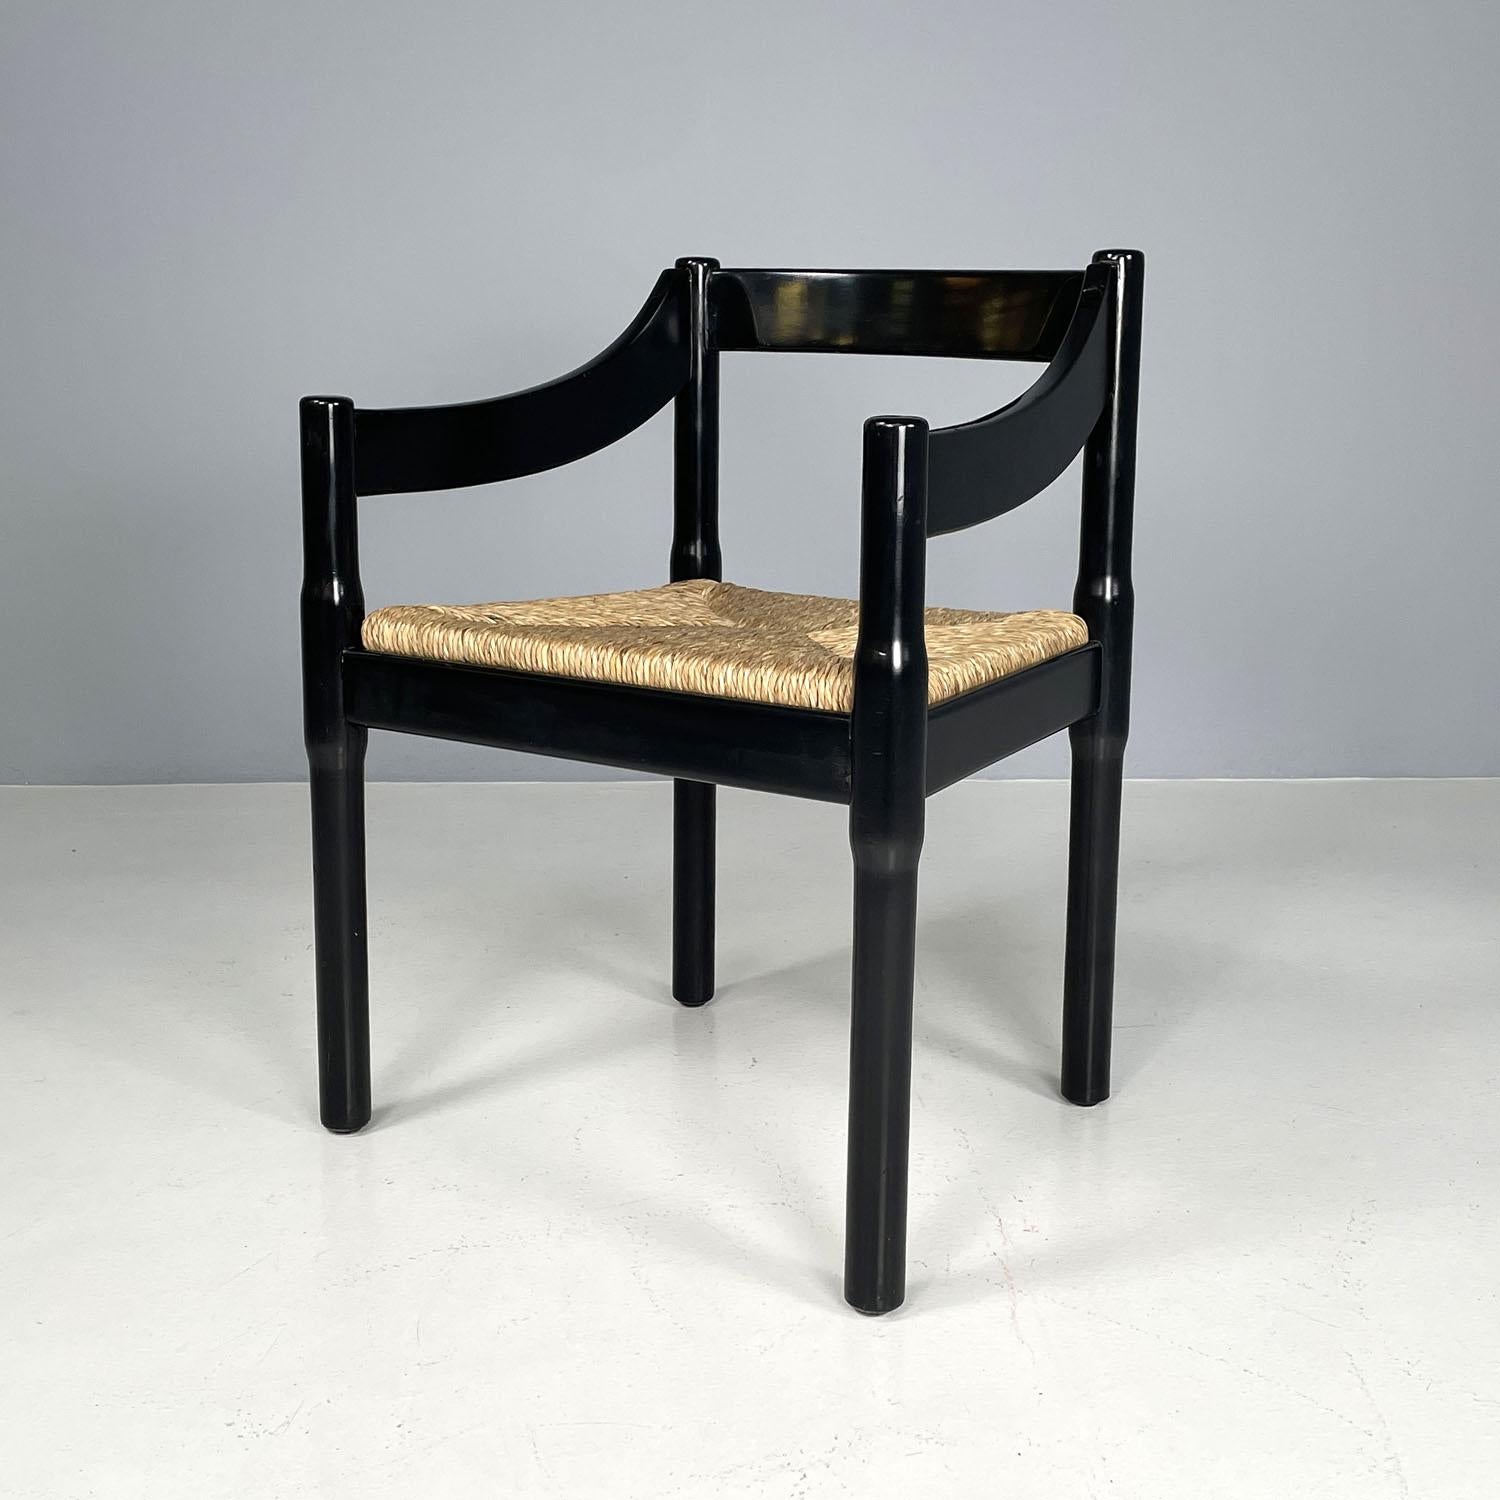 Modern Italian modern black wood chairs Carimate by Vico Magistretti for Cassina, 1970s